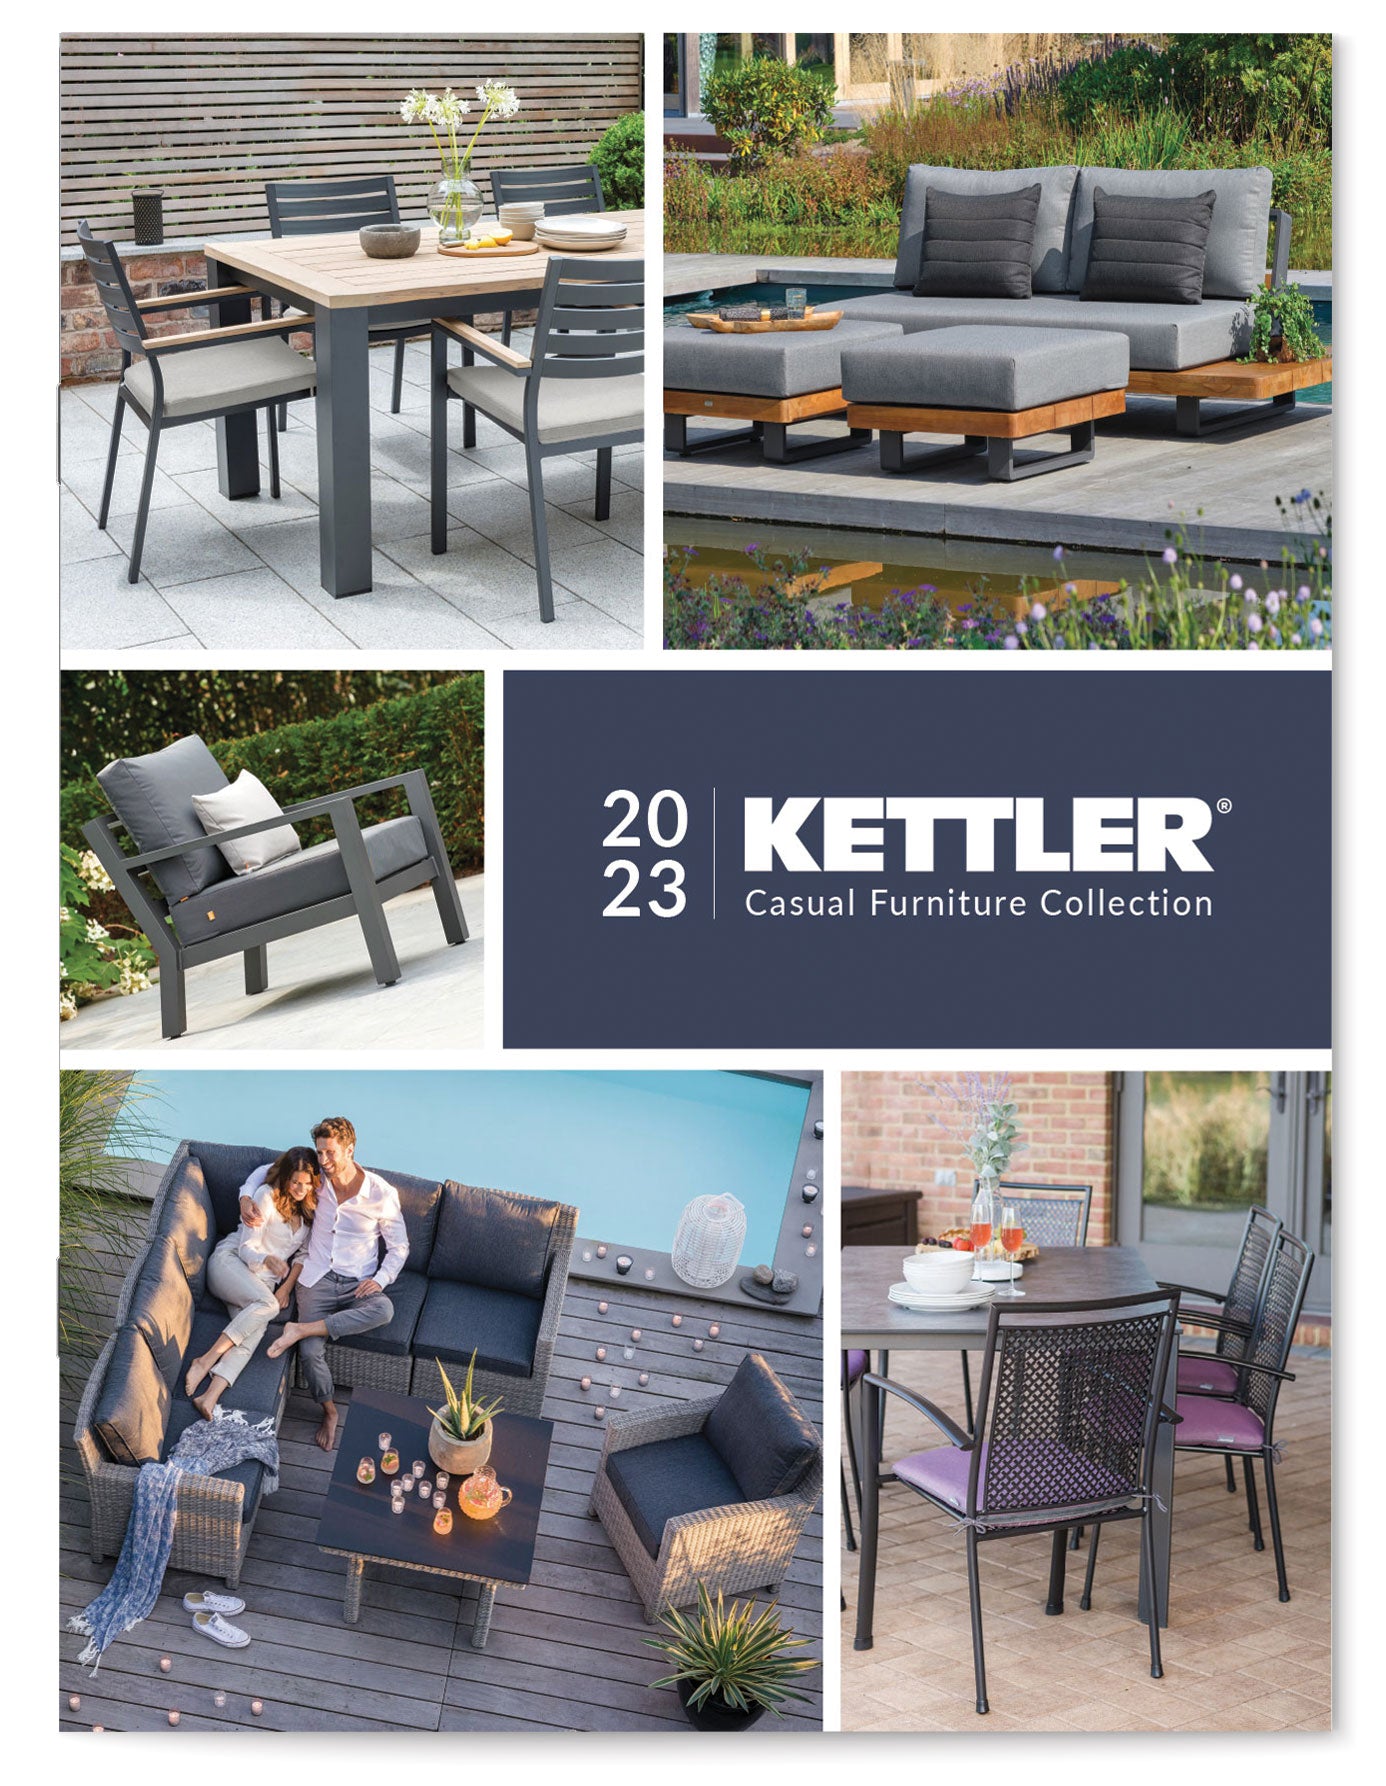 2023 KETTLER Casual Furniture Collection Catalog 